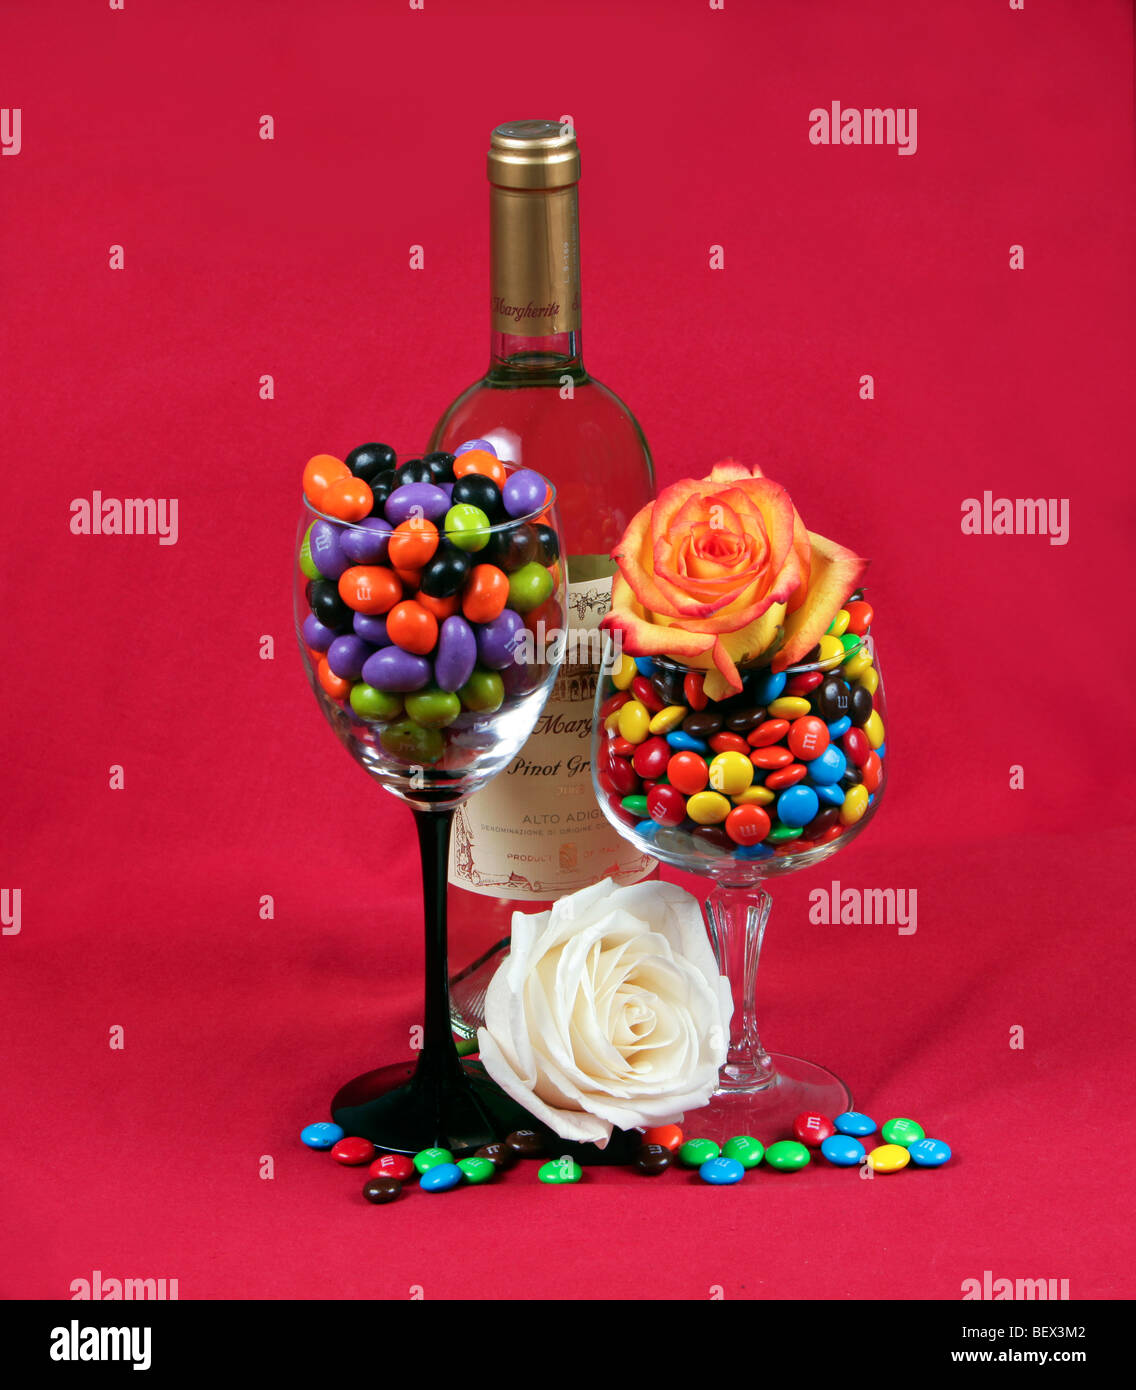 A bottle of wine two wineglasses filled with M&M candy and two beautiful roses. Shot against a red background. A holiday shot. Stock Photo